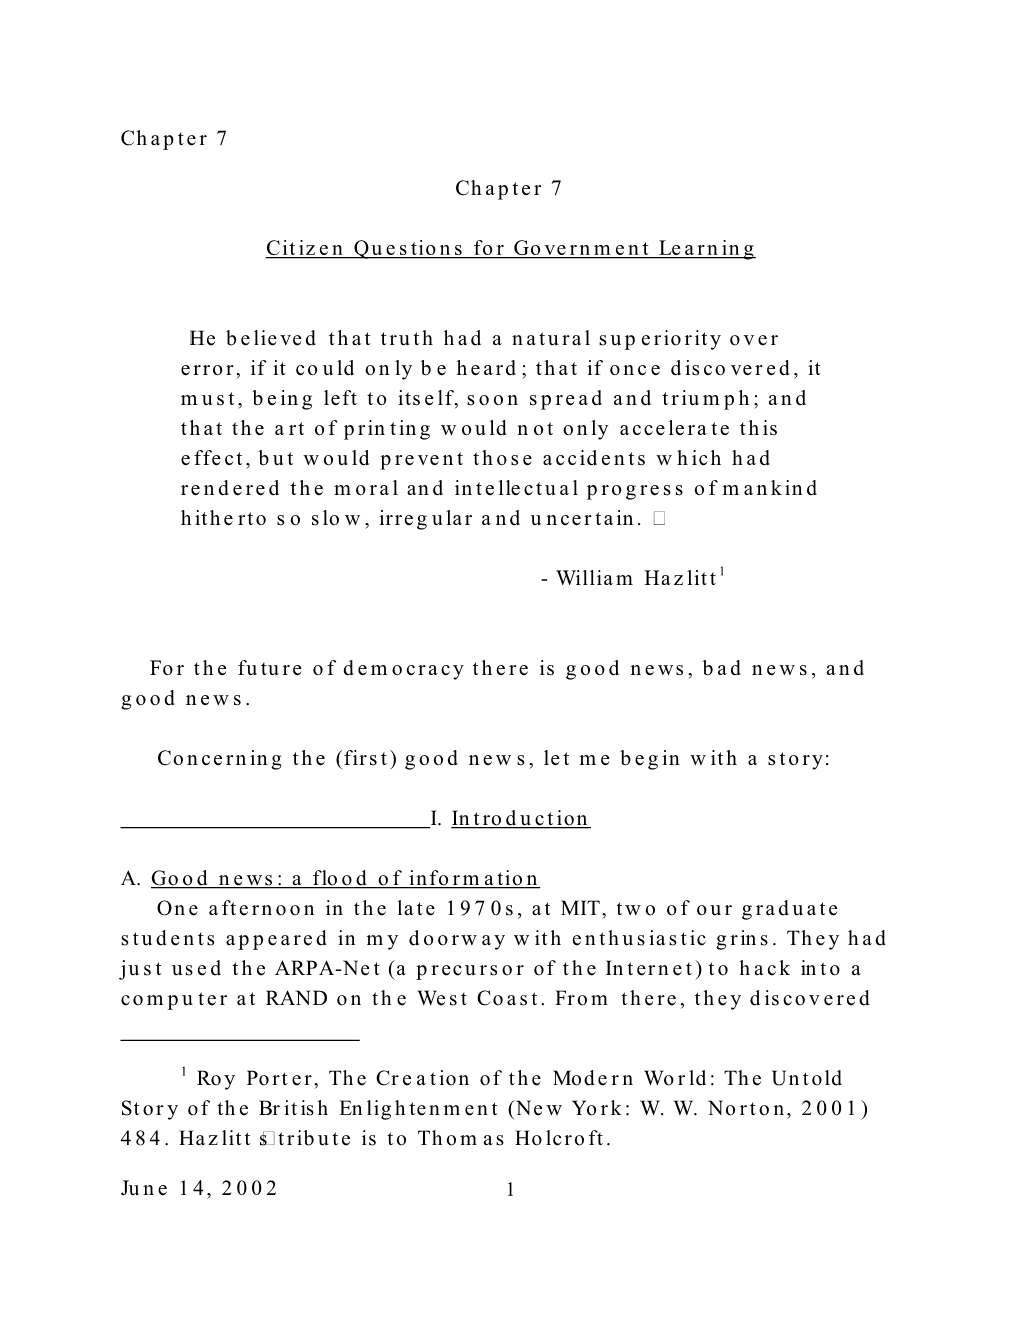 Chapter 7: Citizen Questions for Government Learning